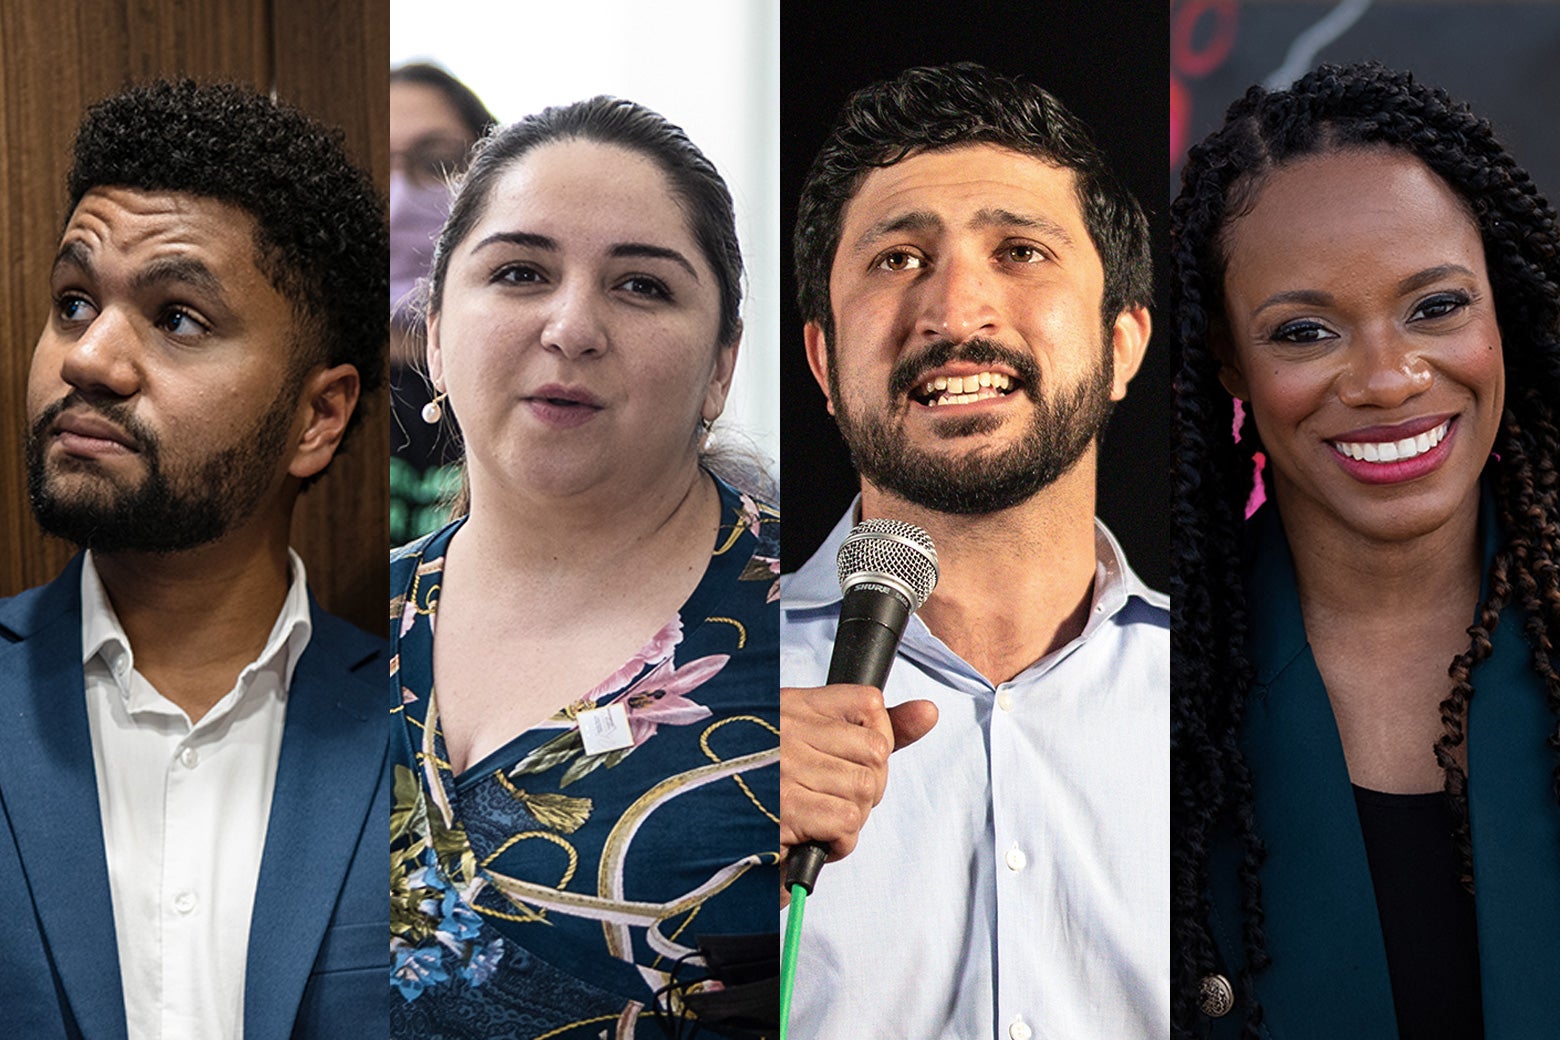 A photo compilation of some progressive winners of the 2022 midterms: Florida’s Maxwell Frost, Illinois’ Delia Ramirez, Texas’ Greg Casar, and Pennsylvania’s Summer Lee.